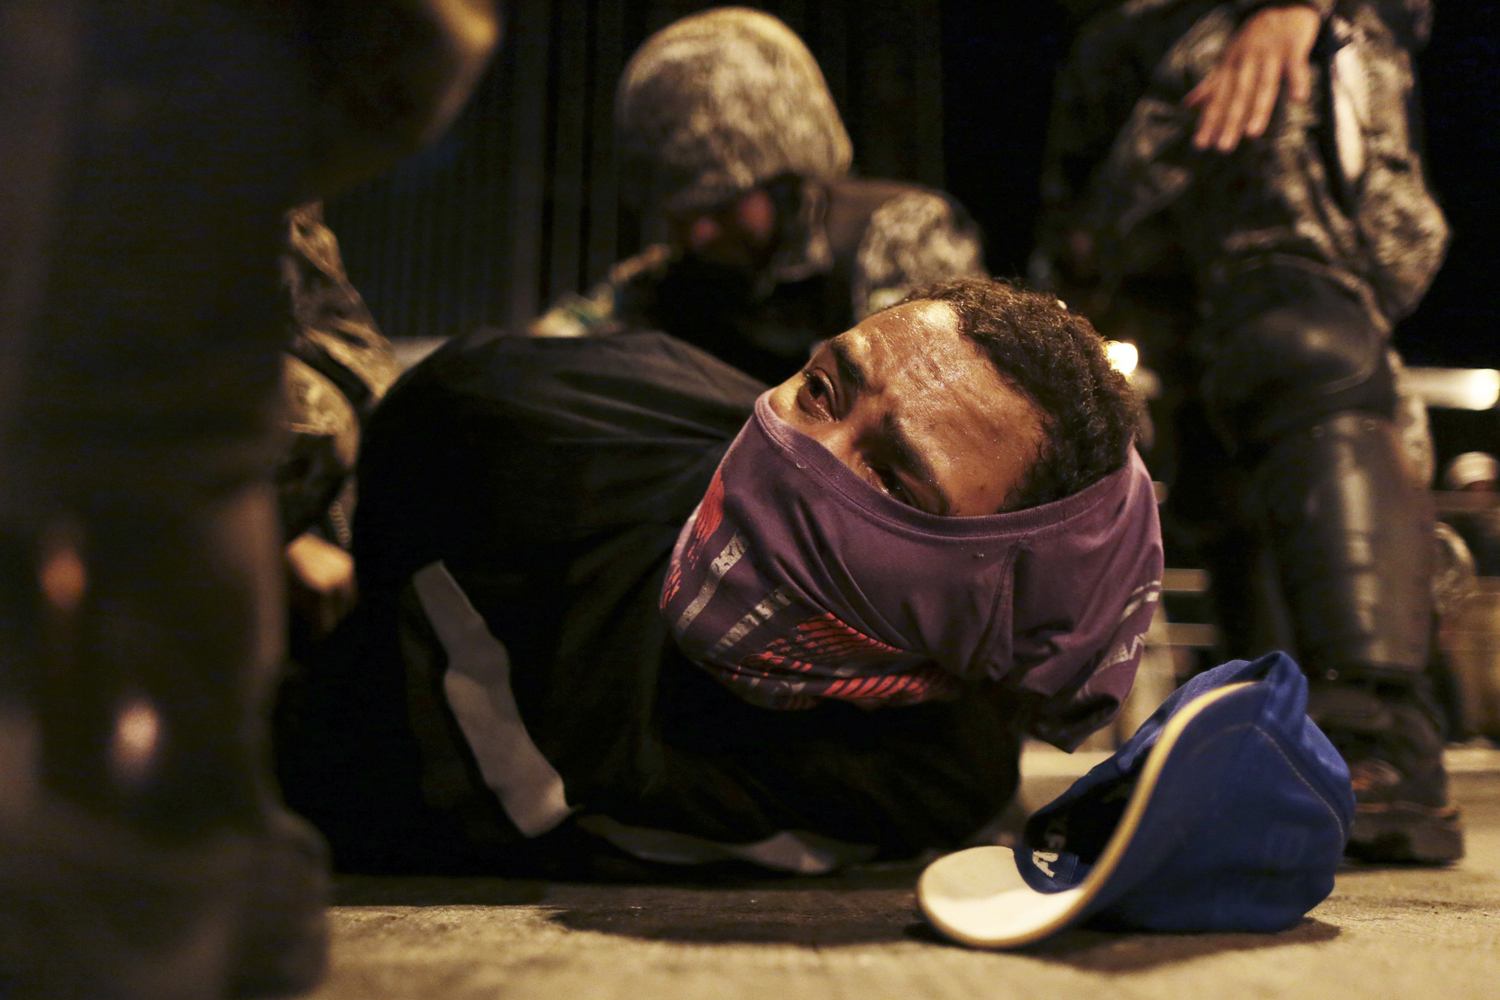 A demonstrator is detained by the police during a protest on the streets of Belo Horizonte